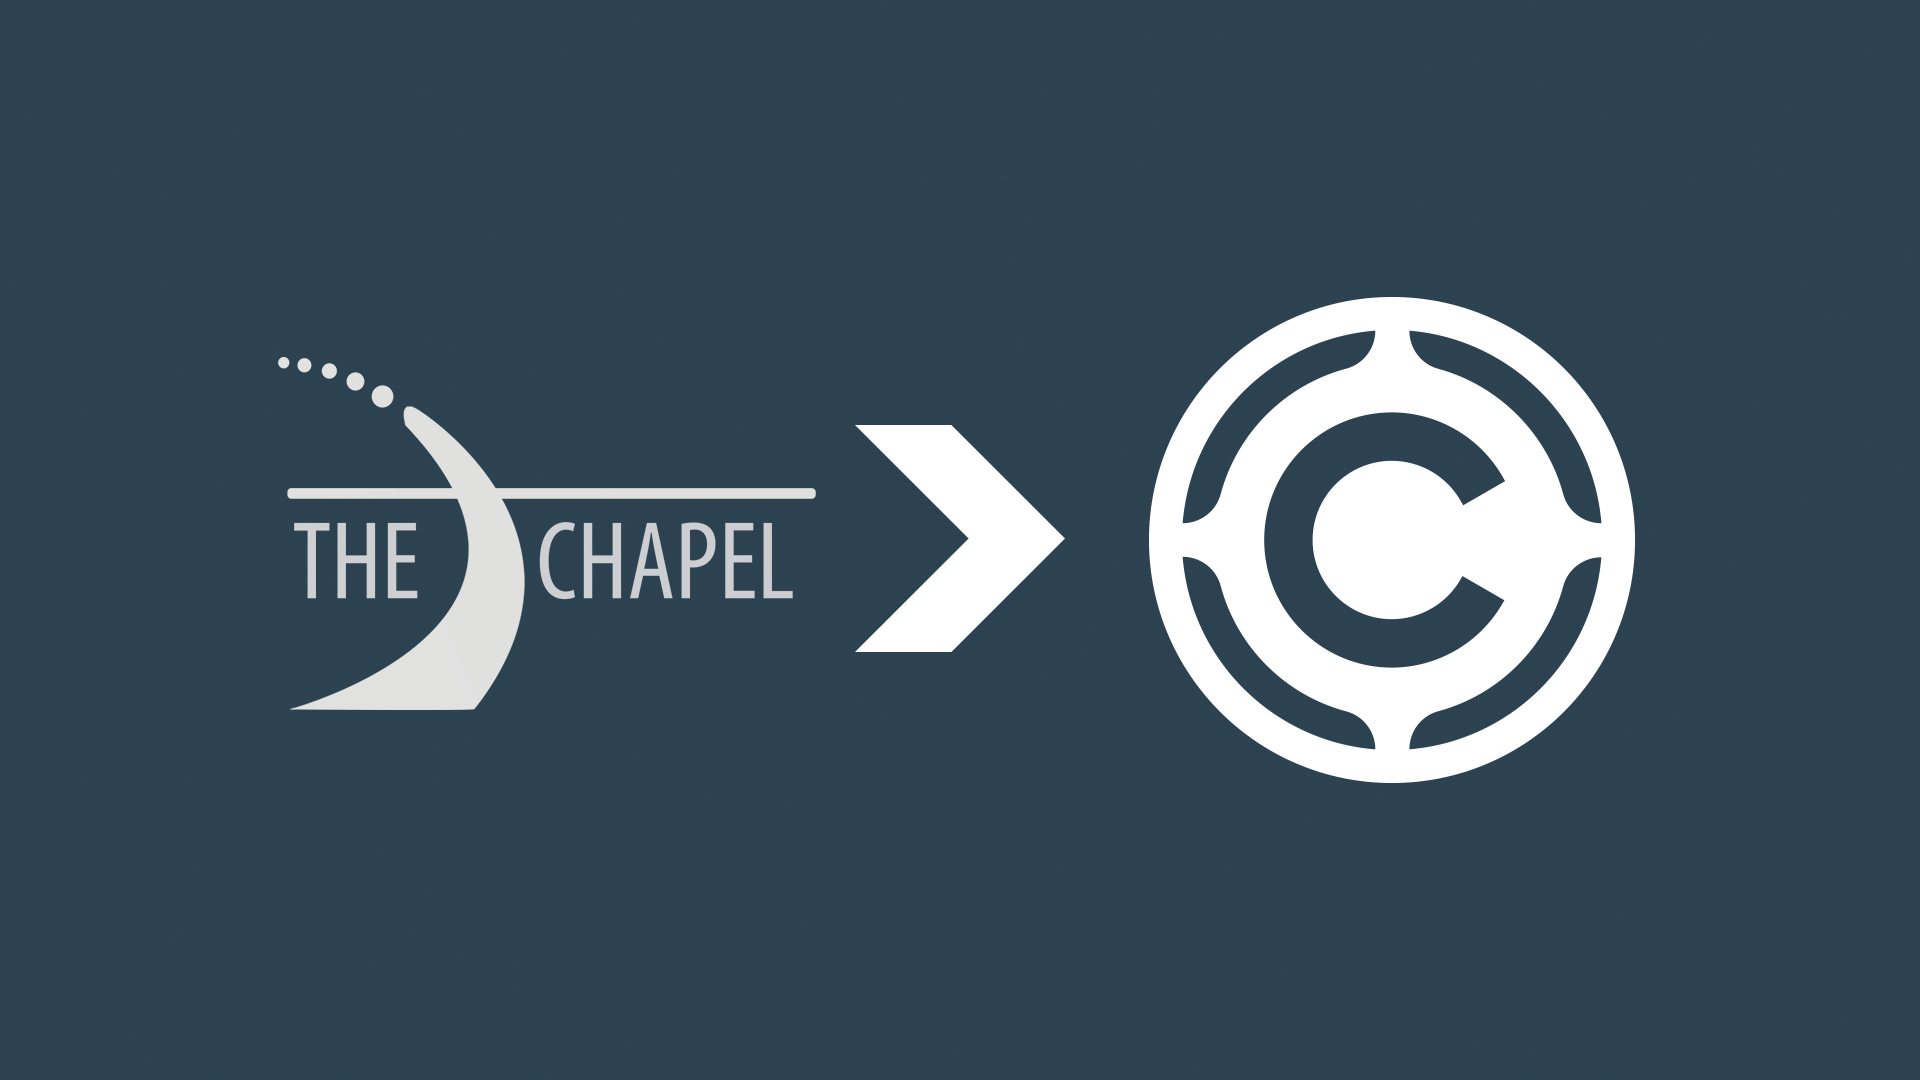 The Chapel old logo to new logo